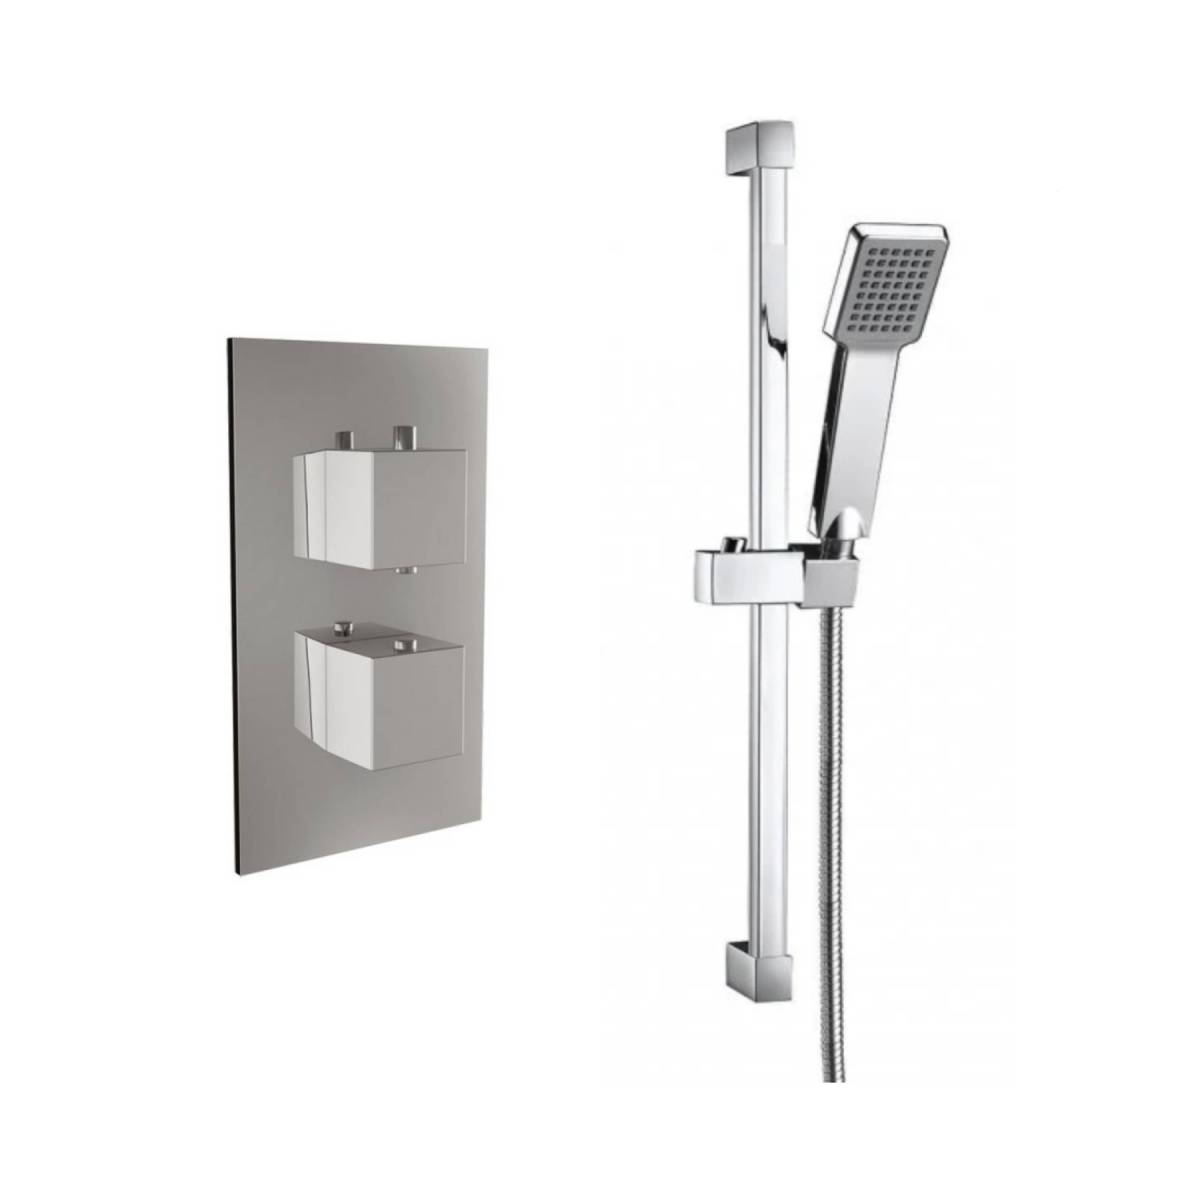 Square Twin Thermostatic Concealed Mixer Shower Kit with Slide Rail Kit (12502)